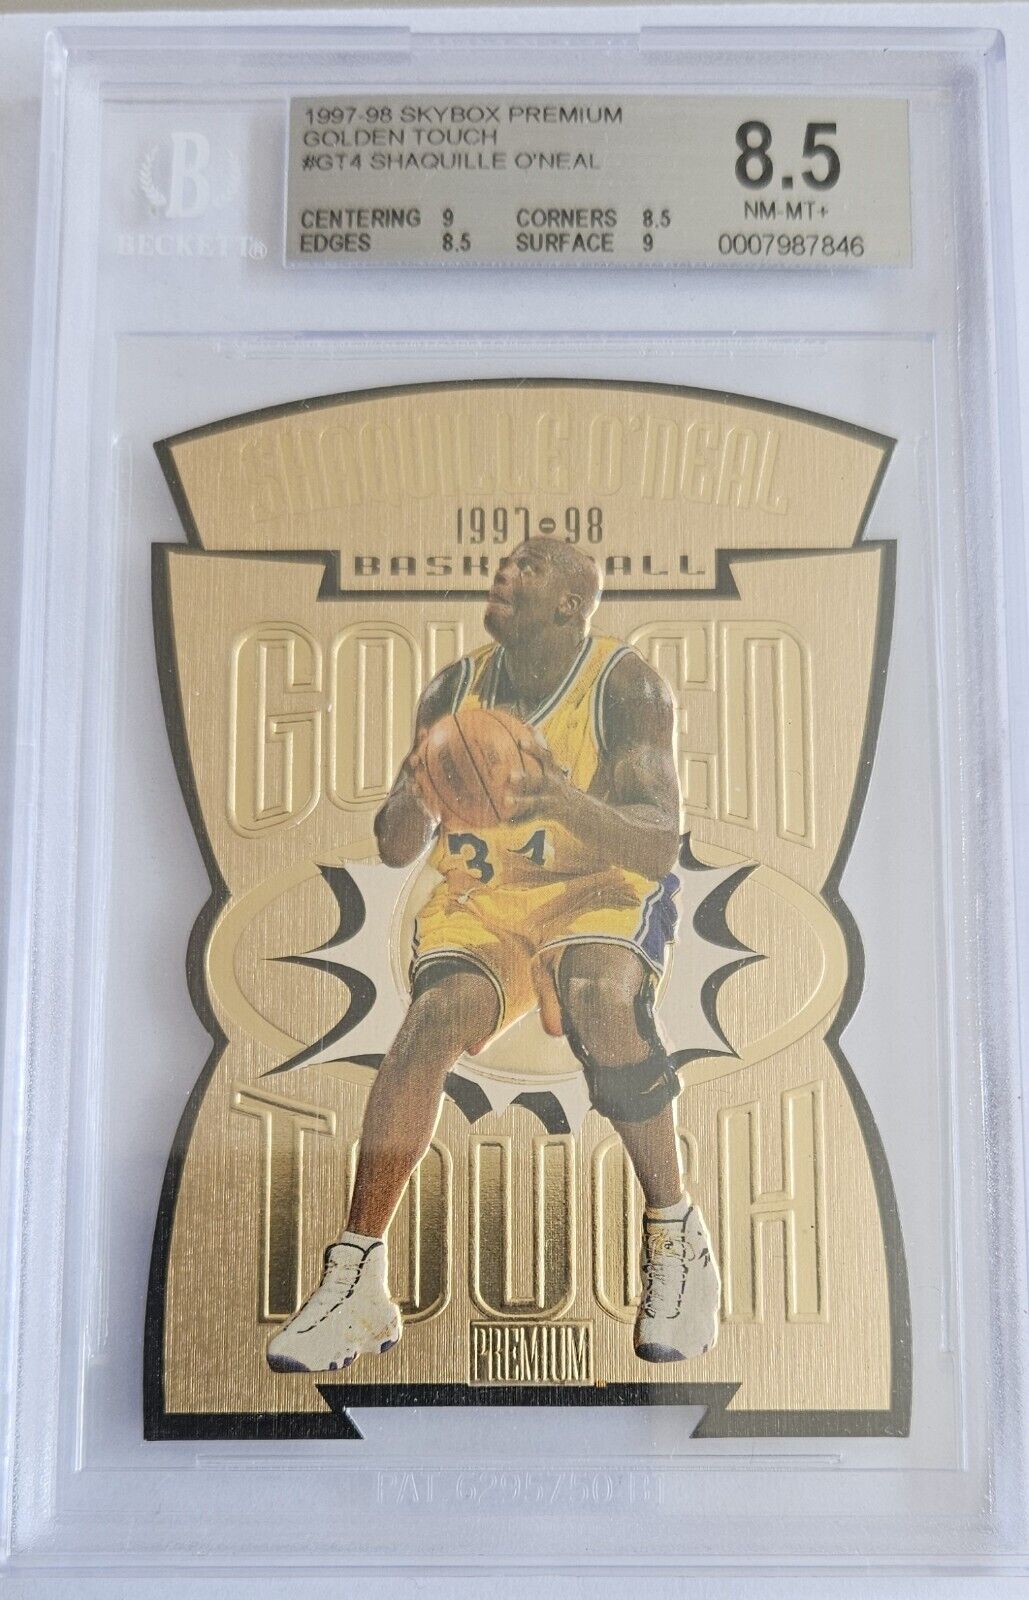 1997-98 Skybox Premium Golden Touch #GT4 - BGS 8.5 - O\'NEAL Shaquille